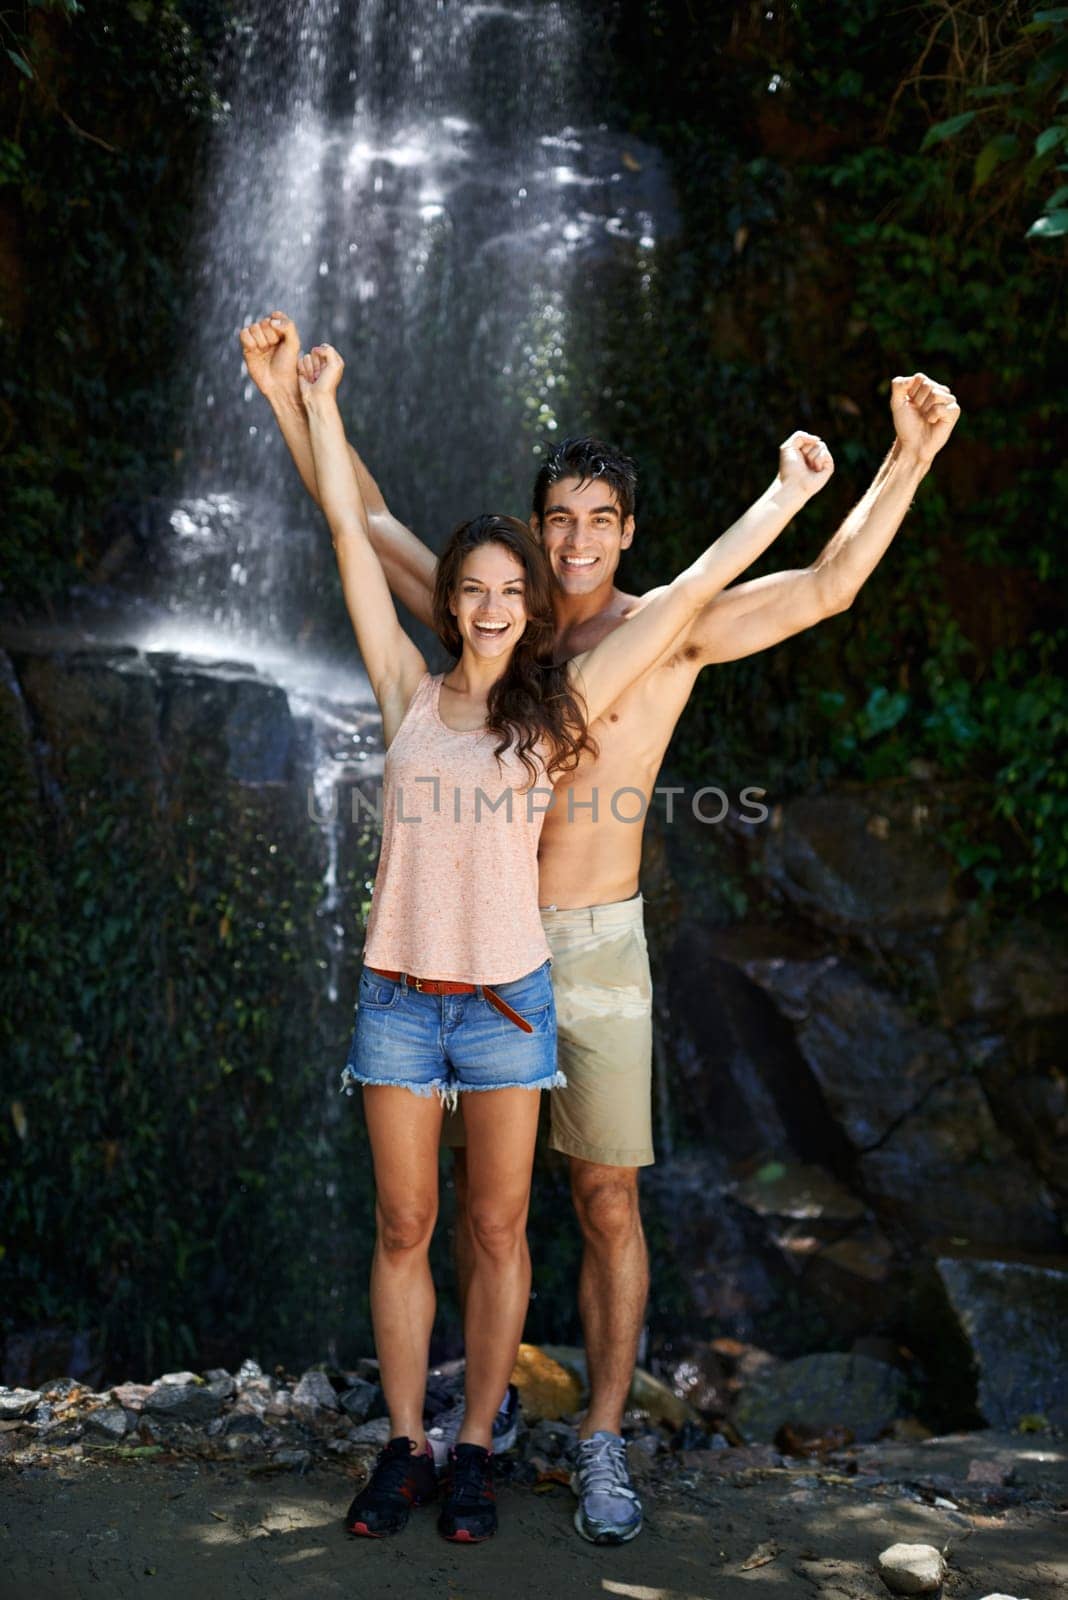 Success, waterfall or portrait of happy couple in nature or journey on outdoor trekking adventure. Excited, victory or proud people cheering on holiday vacation for exercise goals, travel or wellness by YuriArcurs